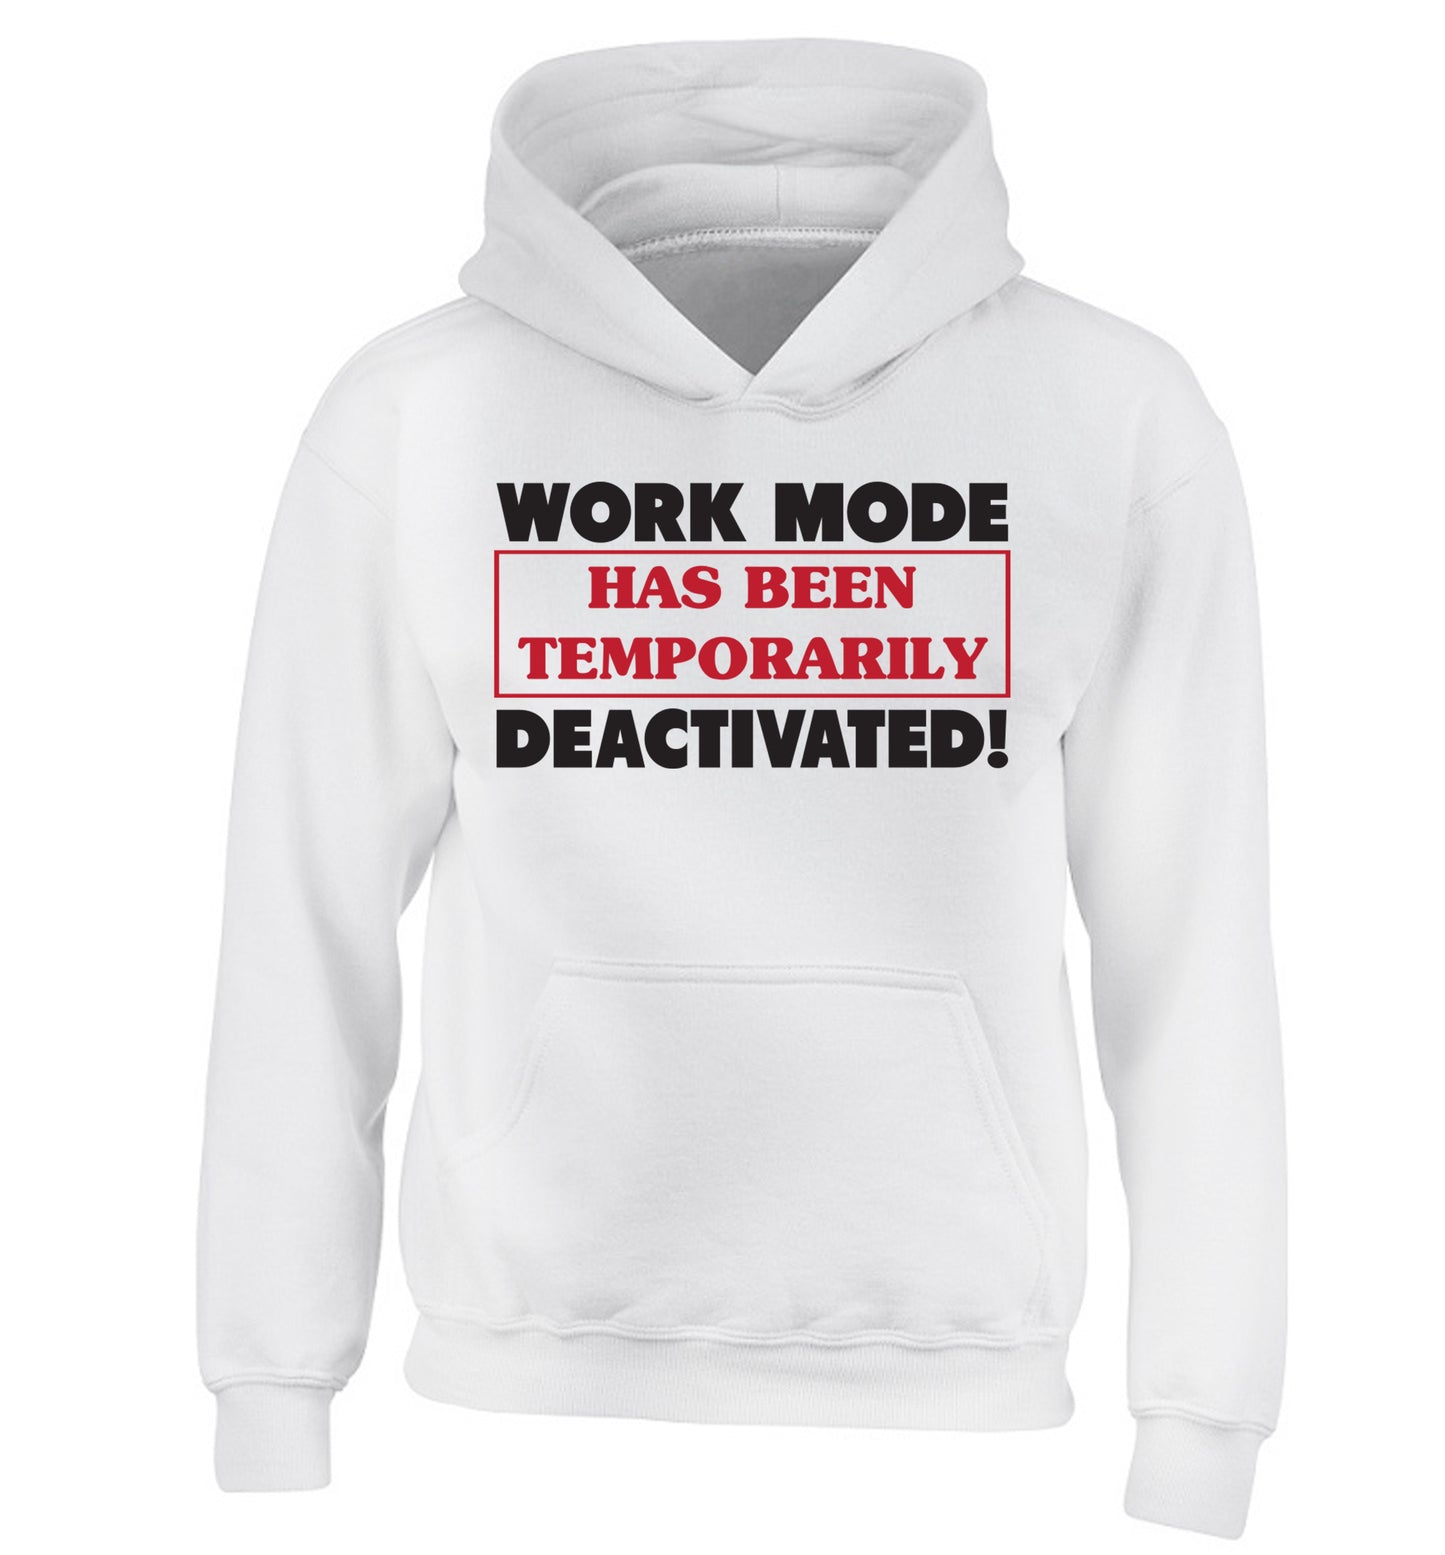 Work mode has now been temporarily deactivated children's white hoodie 12-13 Years